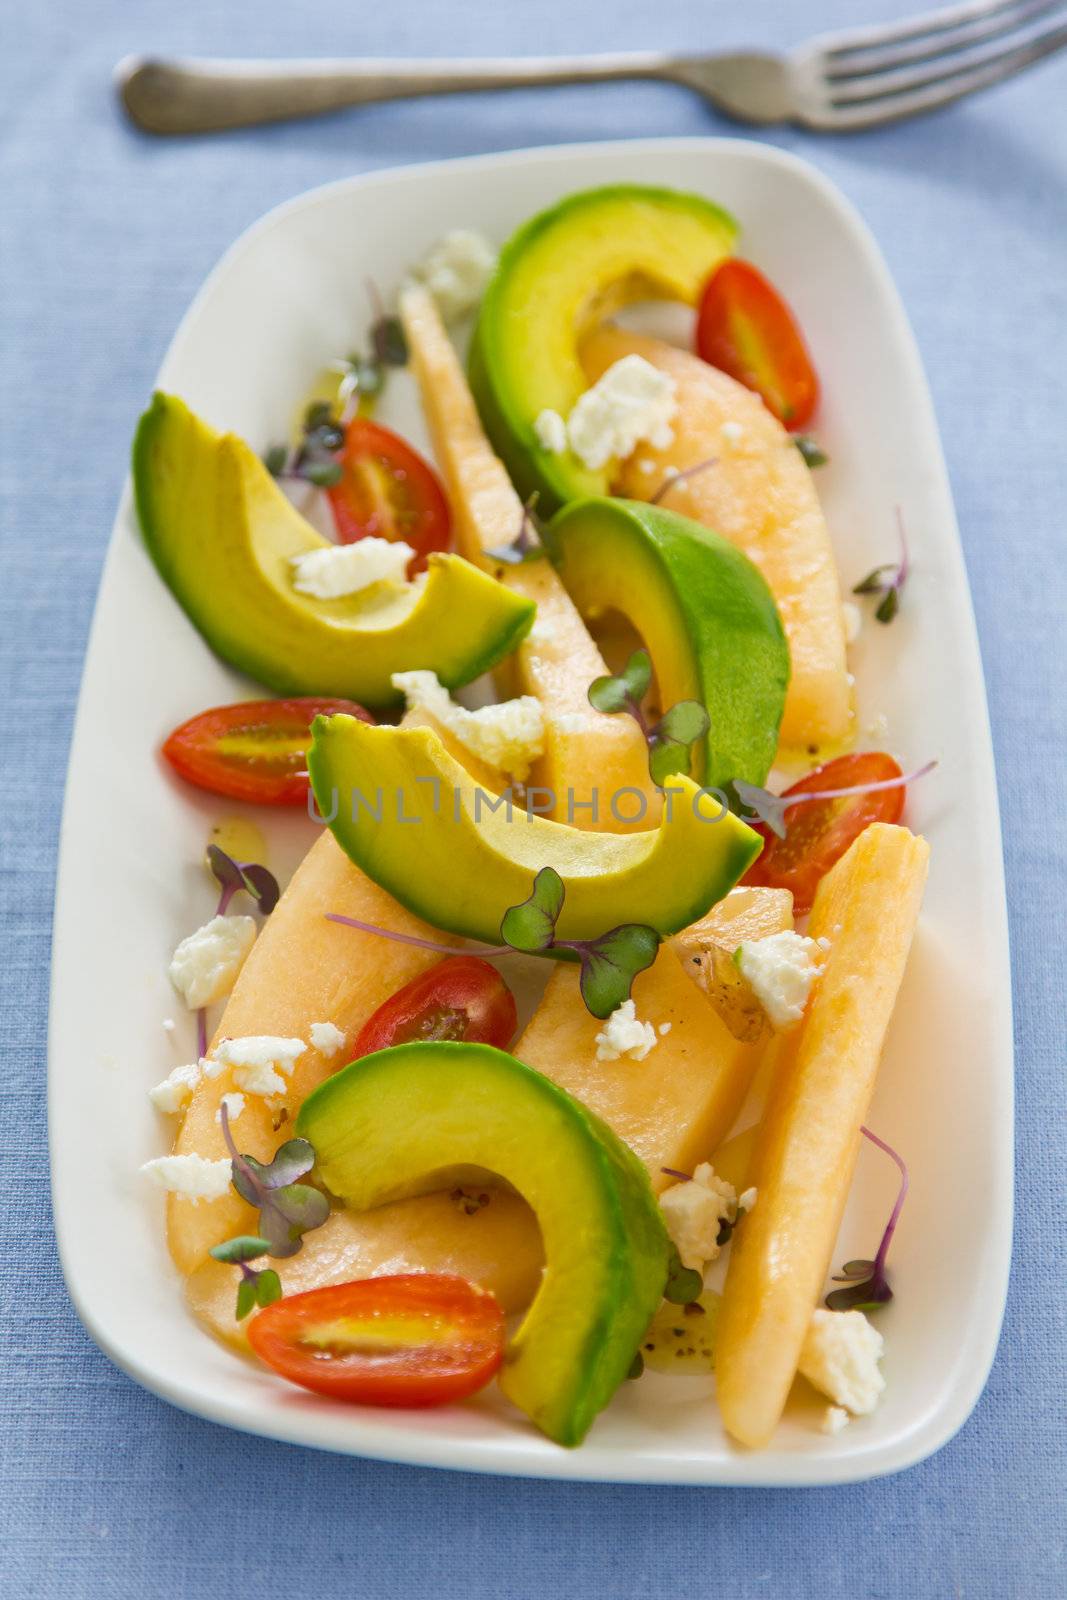 Avocado with Cantaloupe and Feta cheese salad by vanillaechoes